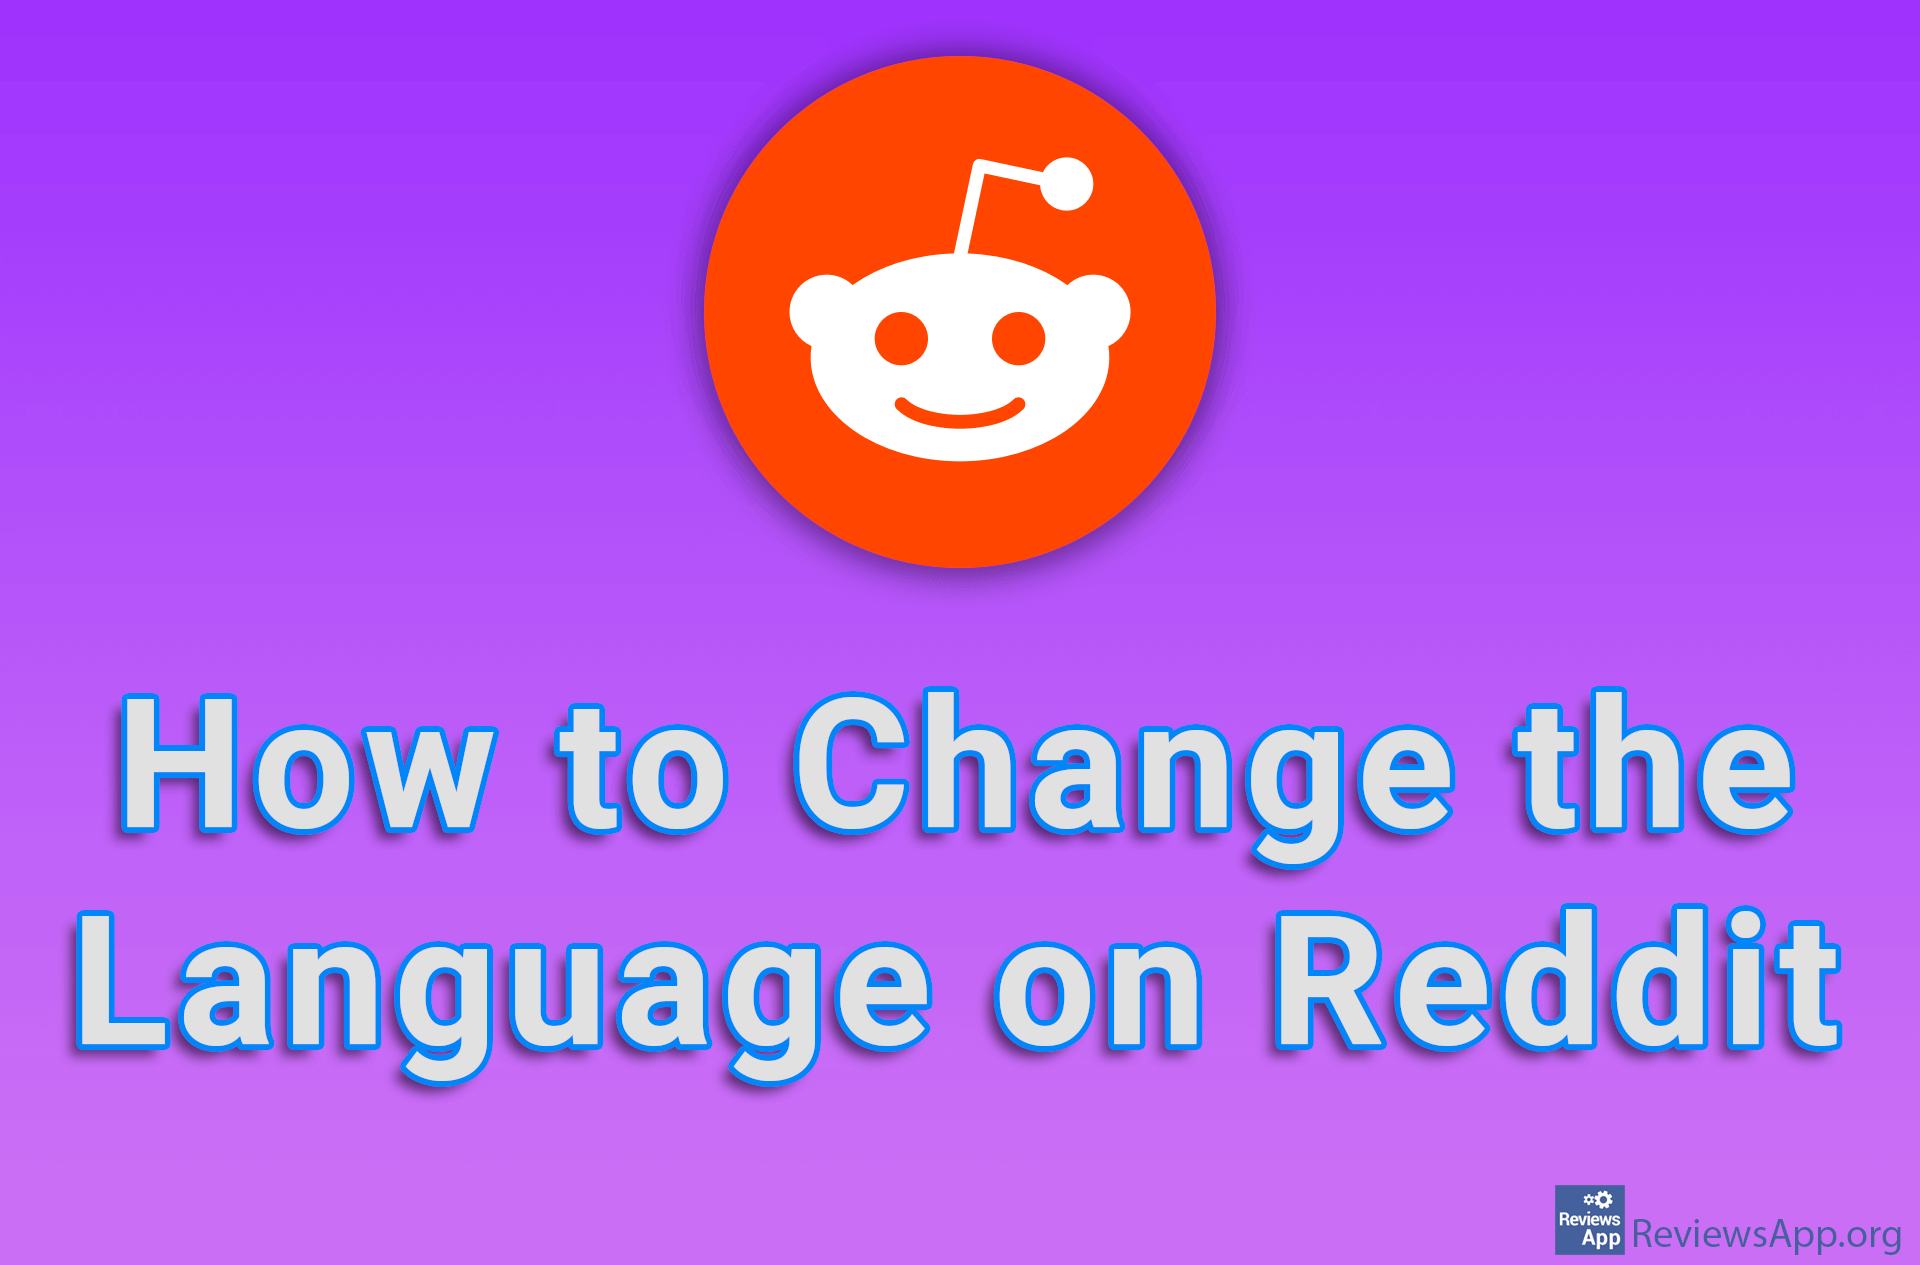 How to Change the Language on Reddit